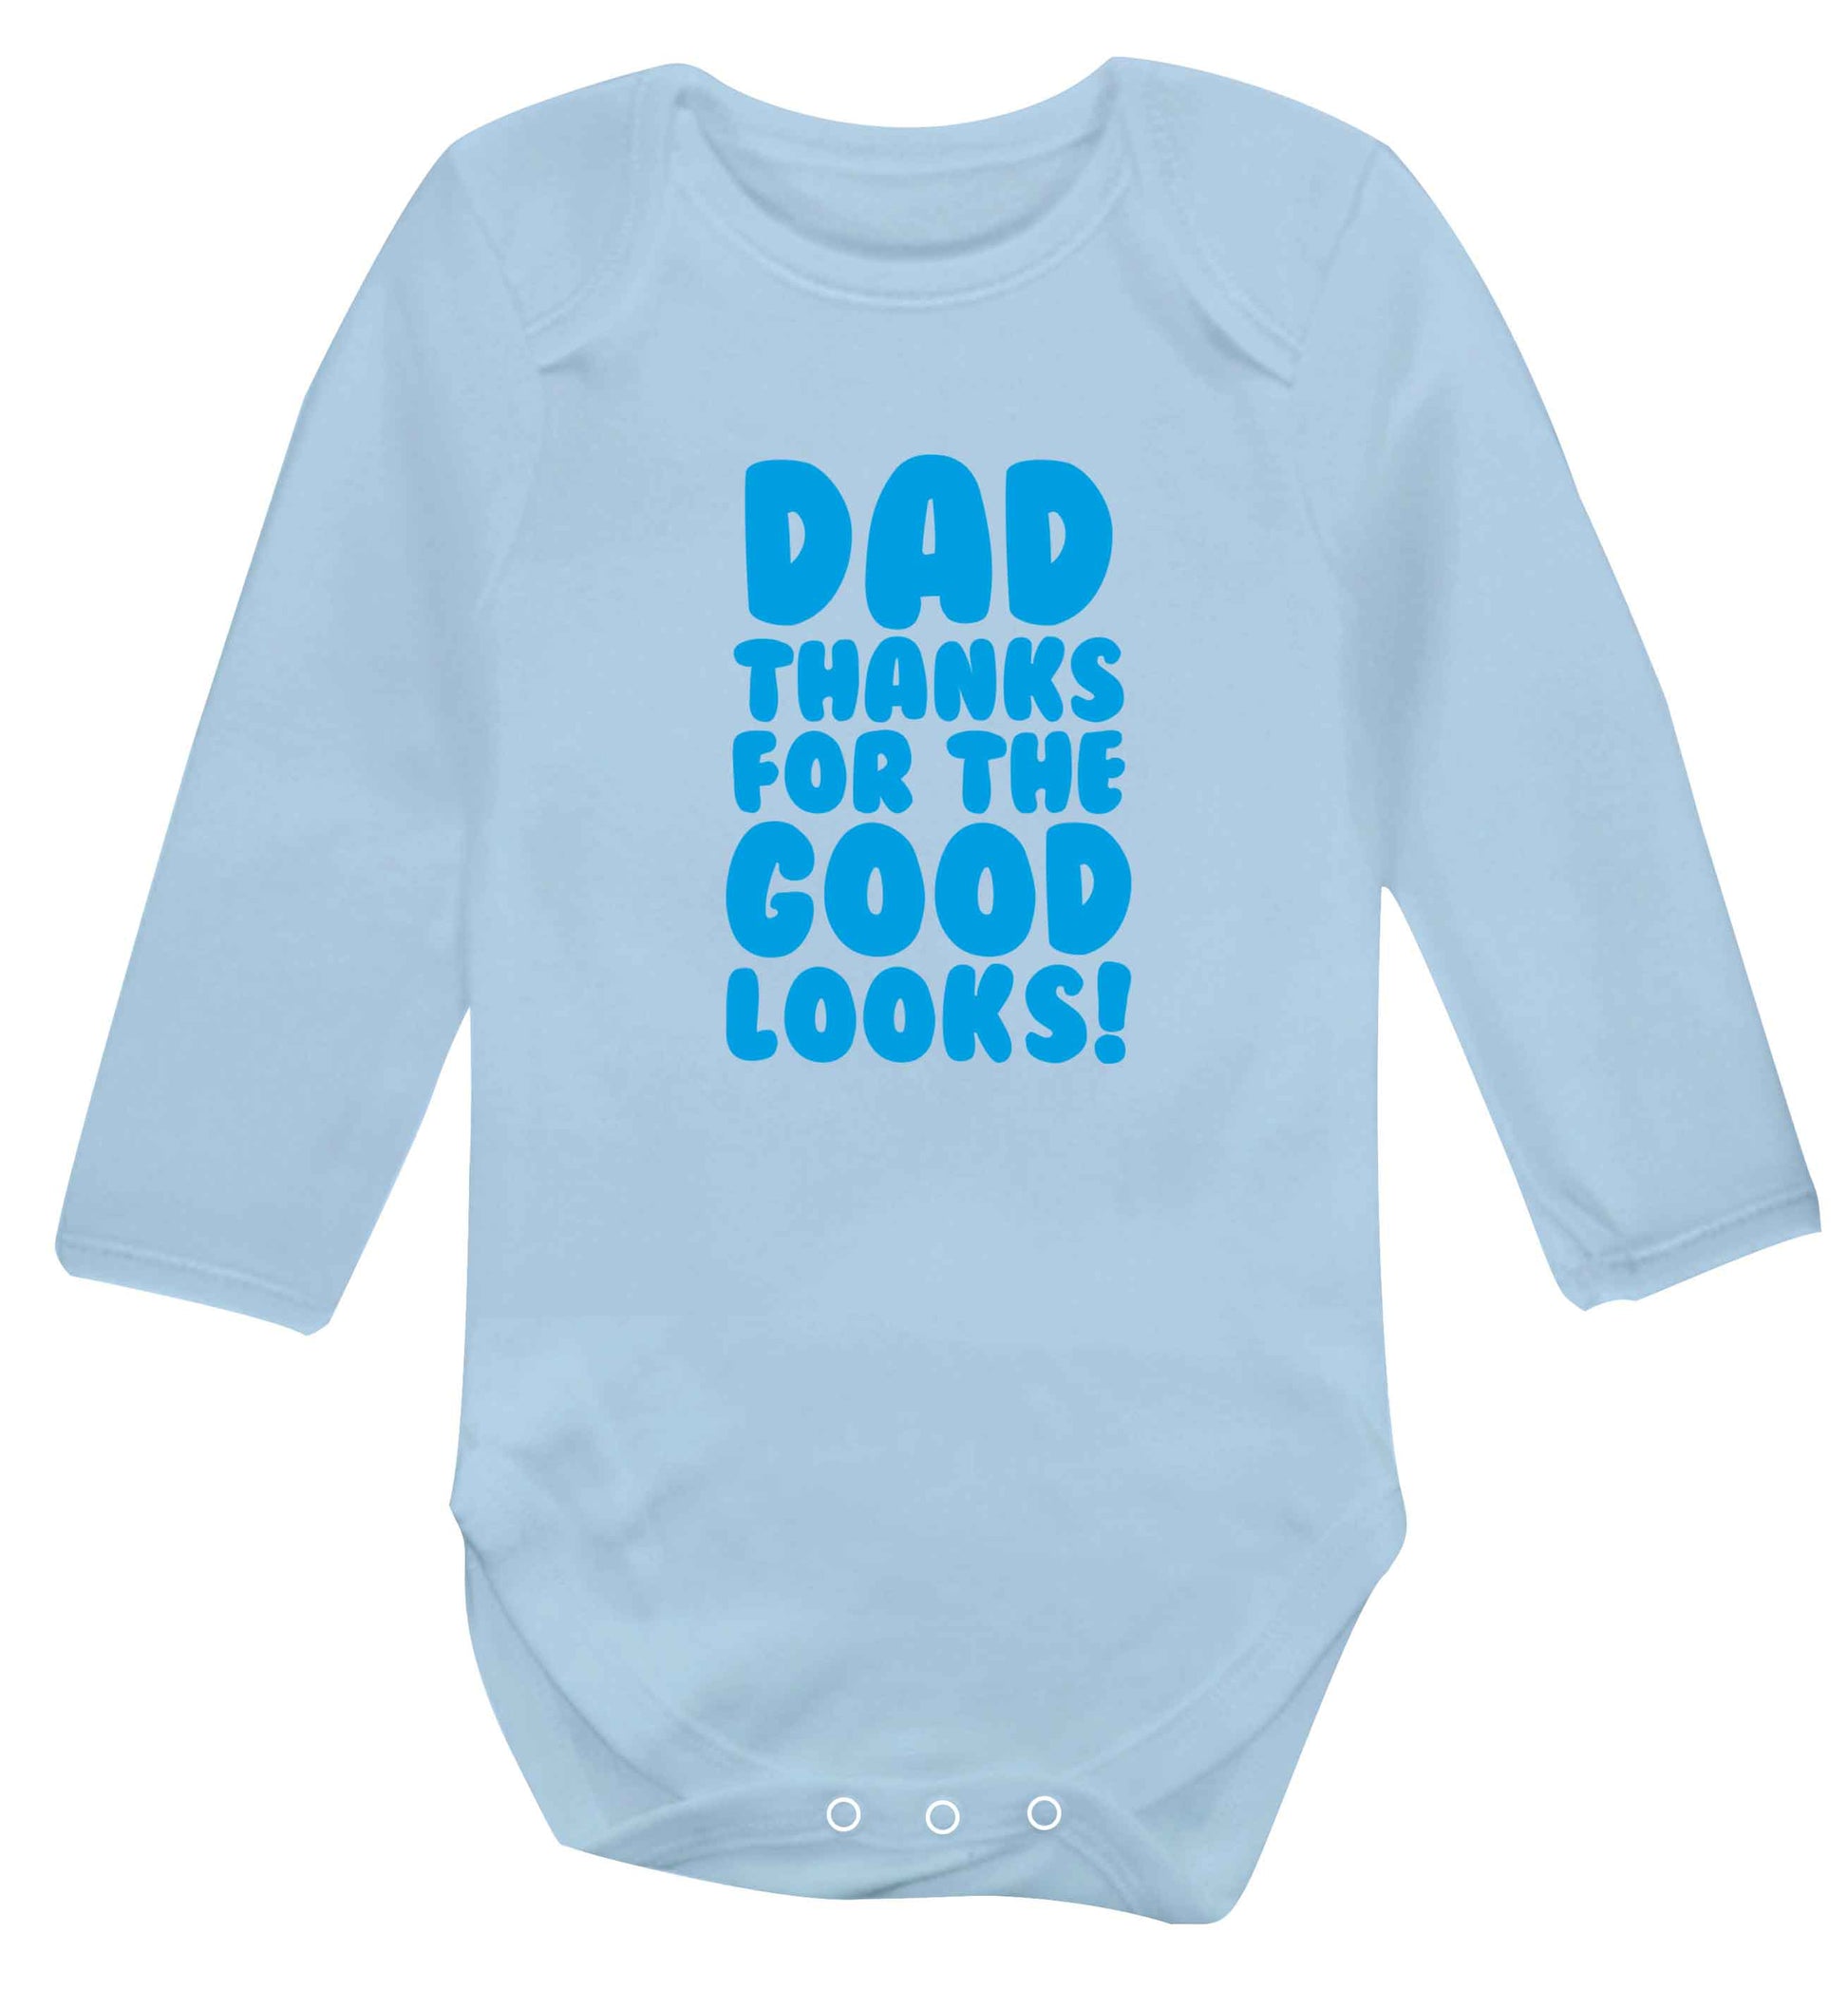 Dad thanks for the good looks baby vest long sleeved pale blue 6-12 months